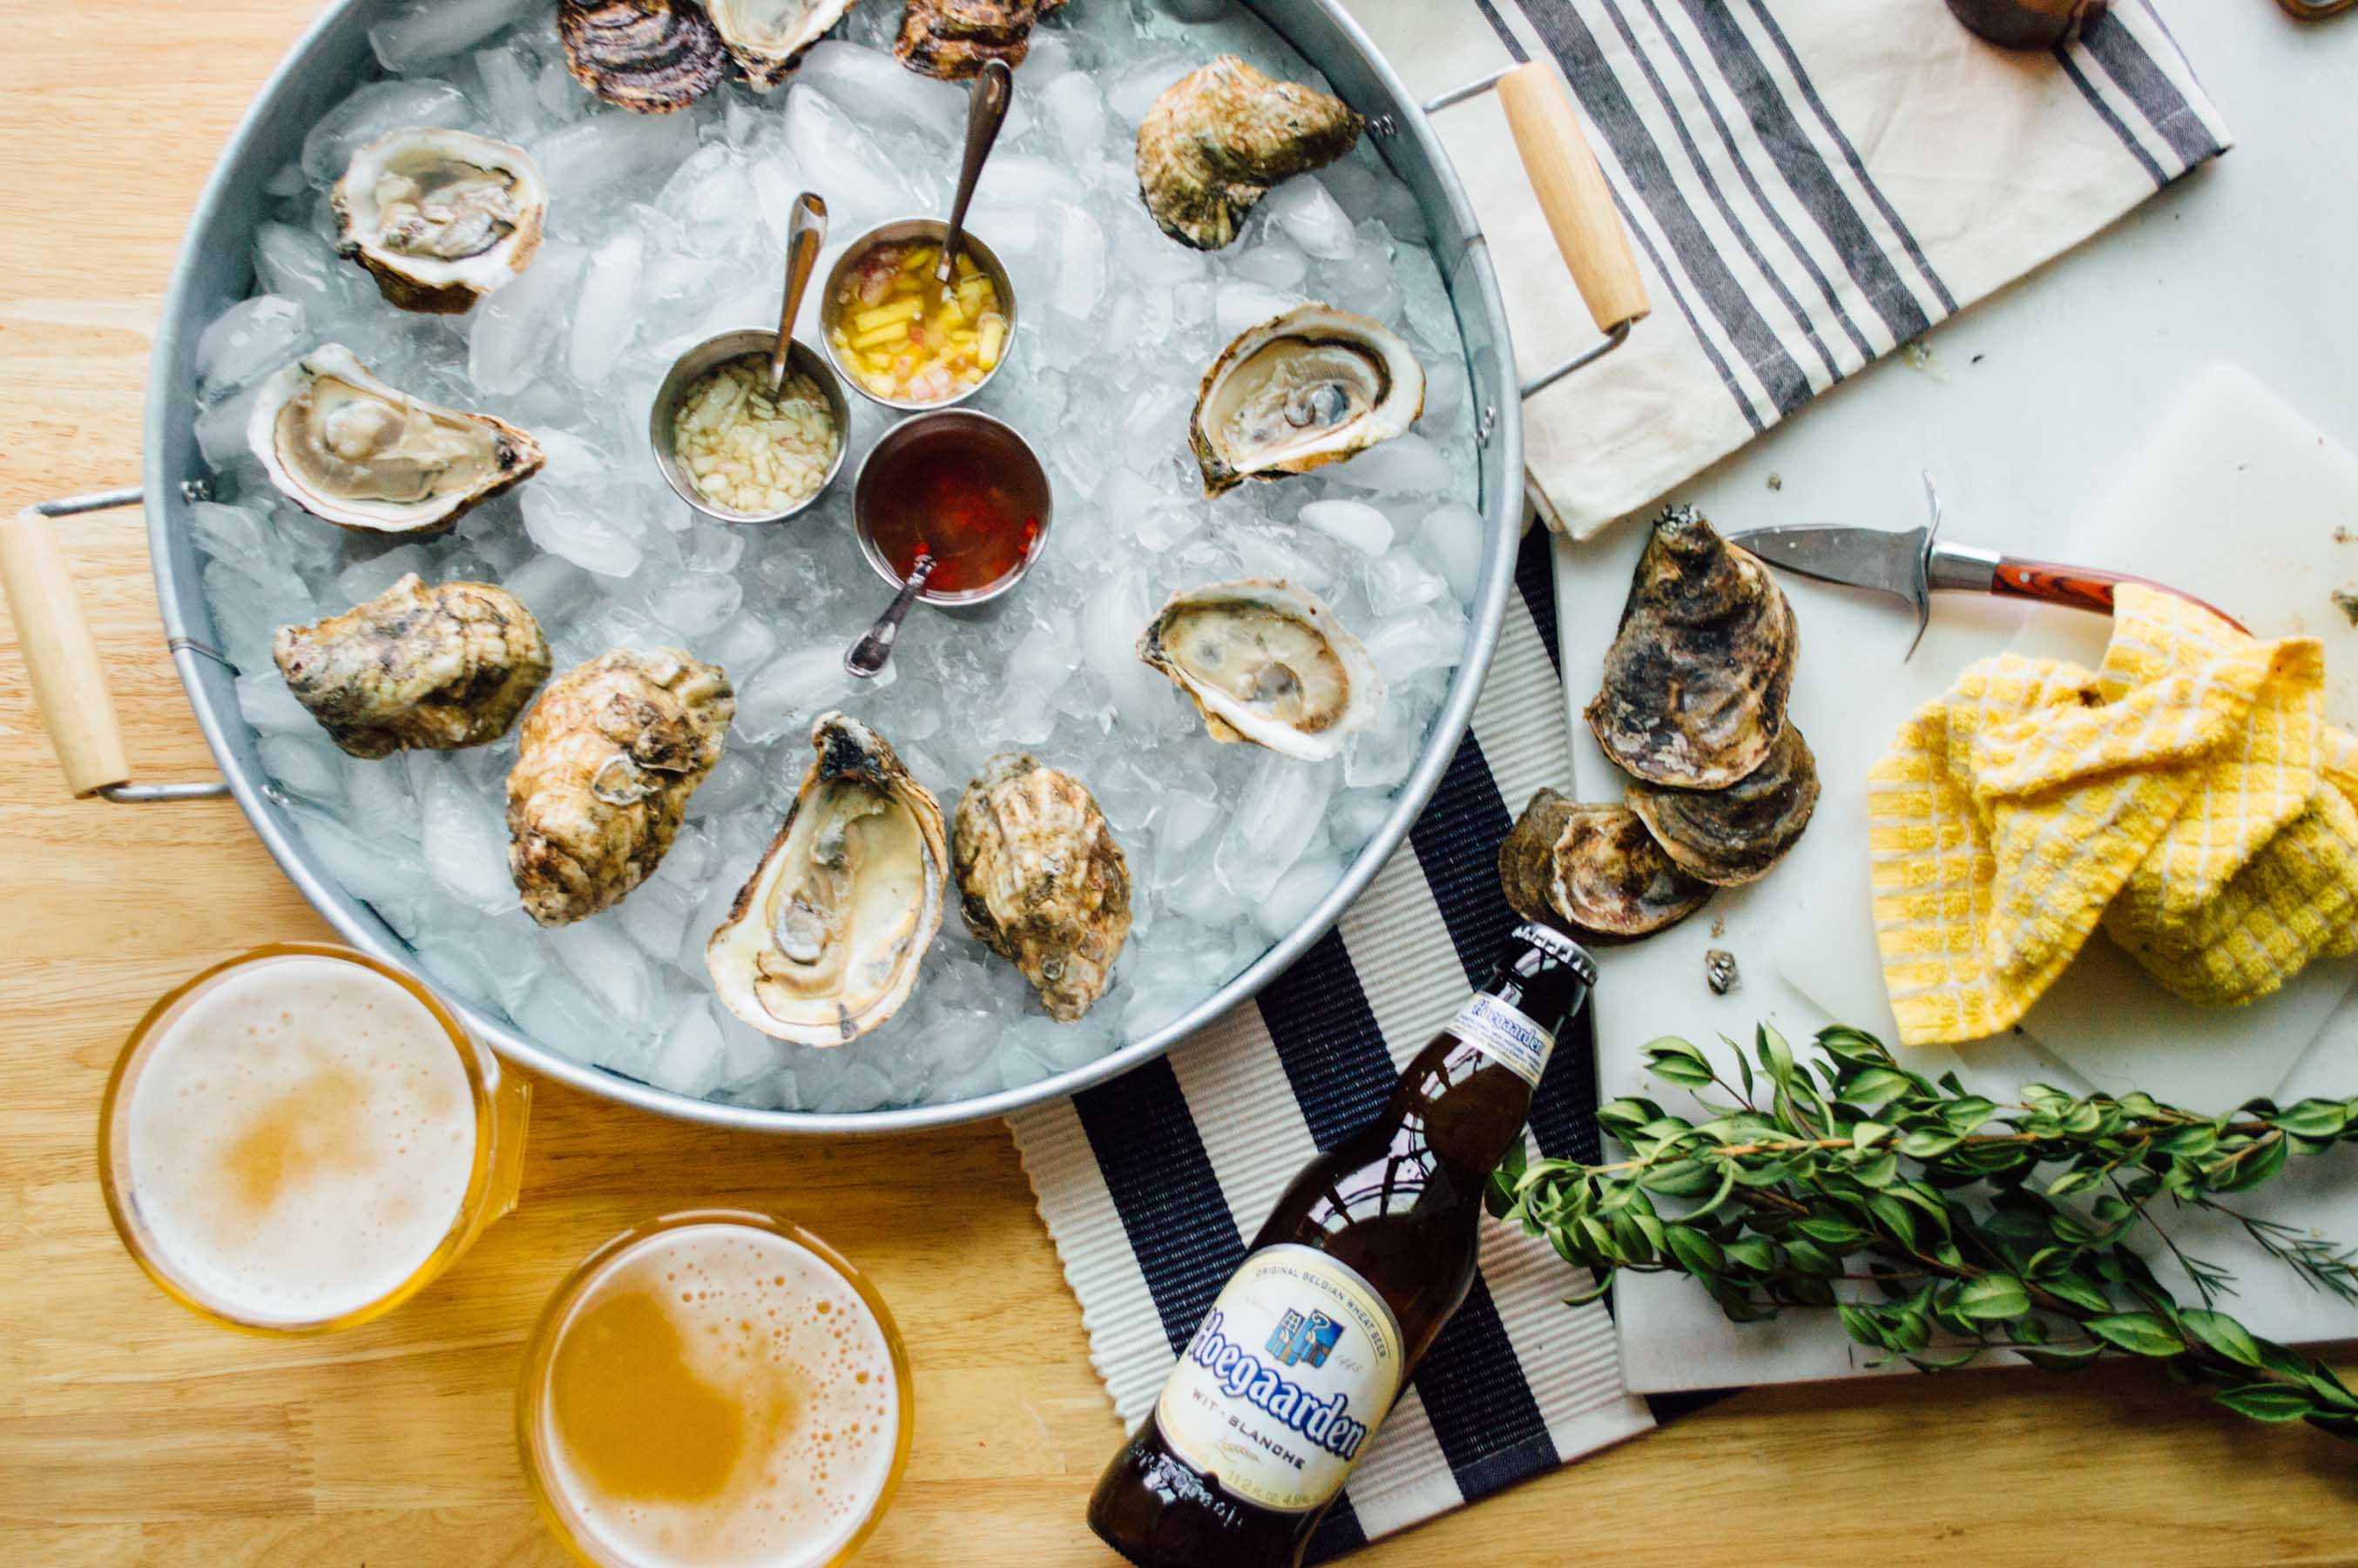 It's Who-Gaar-Den! Loved pairing this sweet Hoegaarden beer with 3 mignonette recipes for a little indoor oyster fest | bygabriella.co